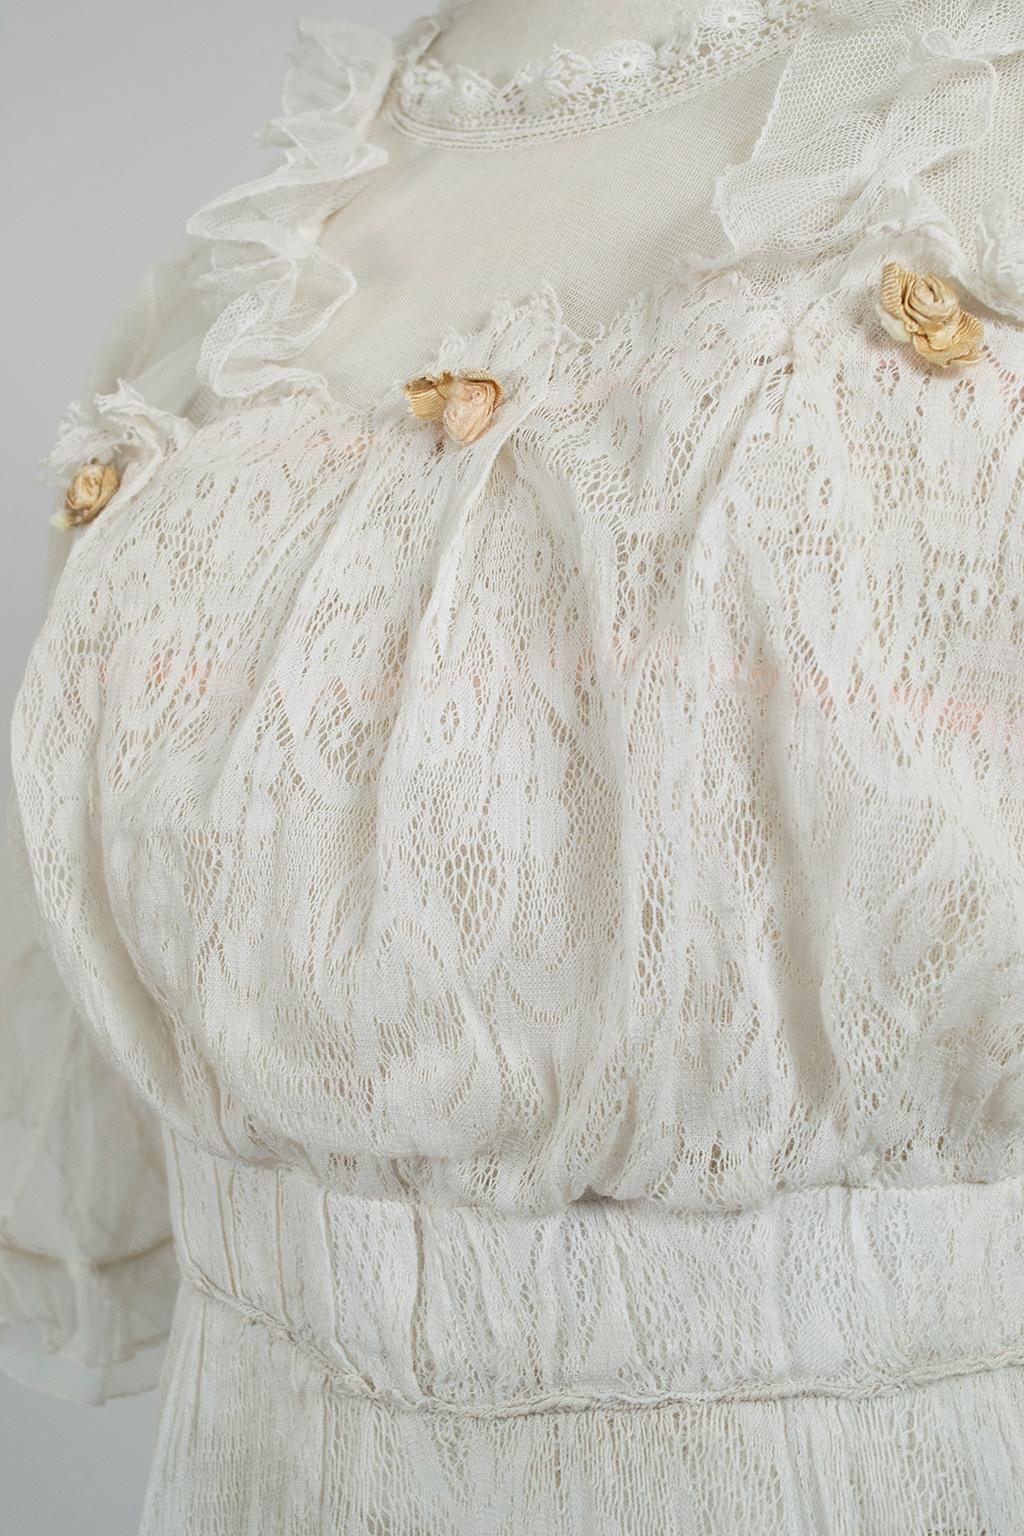 White Edwardian Net Rosebud Afternoon Tea or Bridal Gown - XXS, Early 1900s For Sale 4